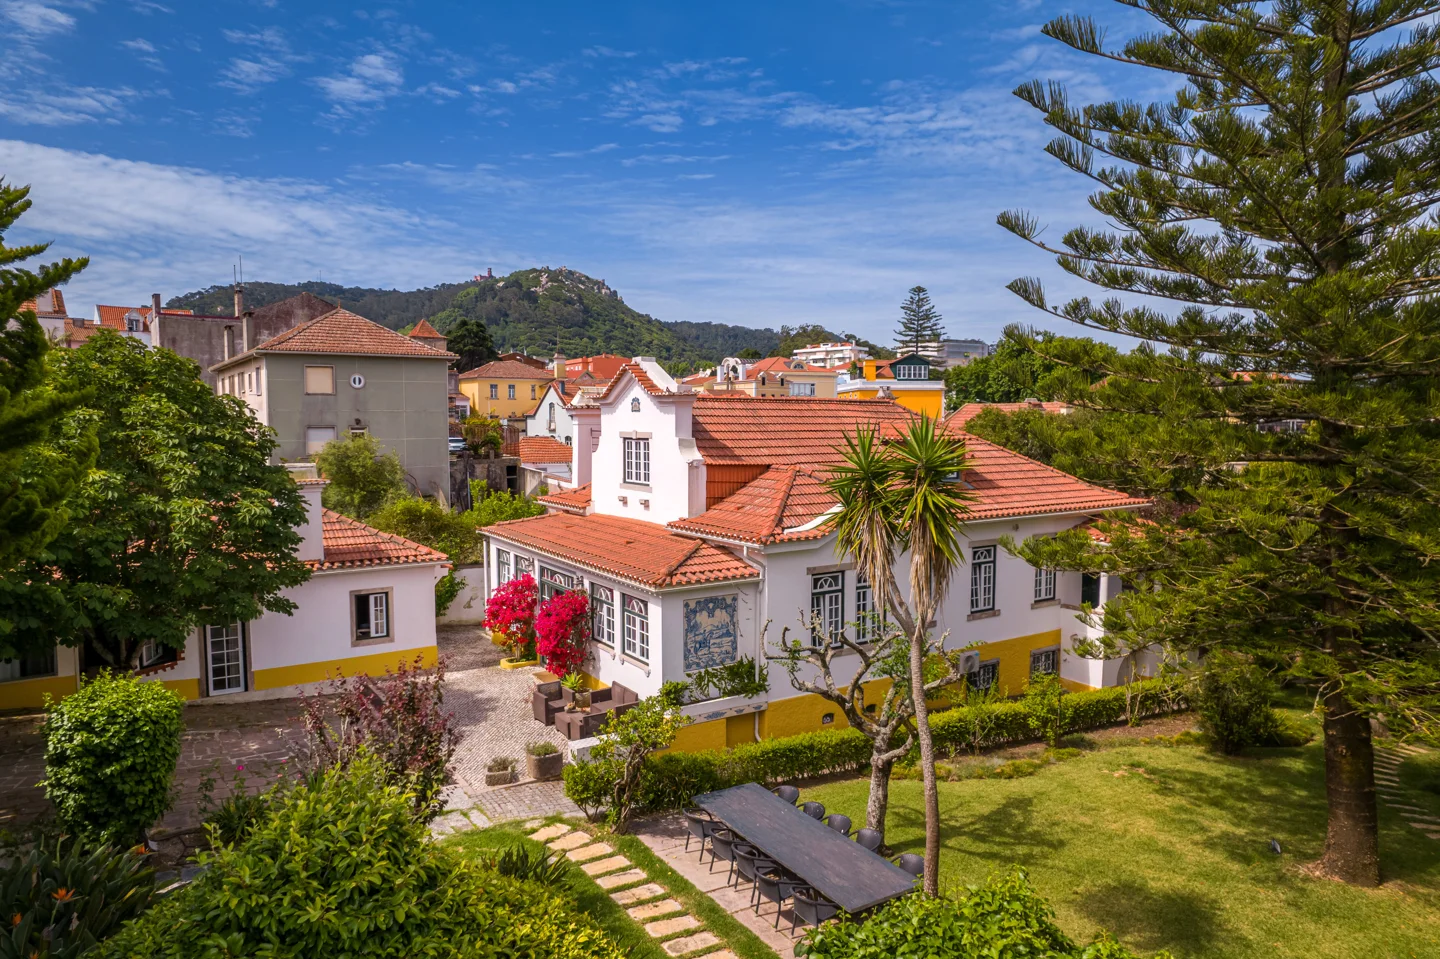 15 Room Boutique Hotel with Pool, Spa, Restaurant & more in the Heart of Sintra